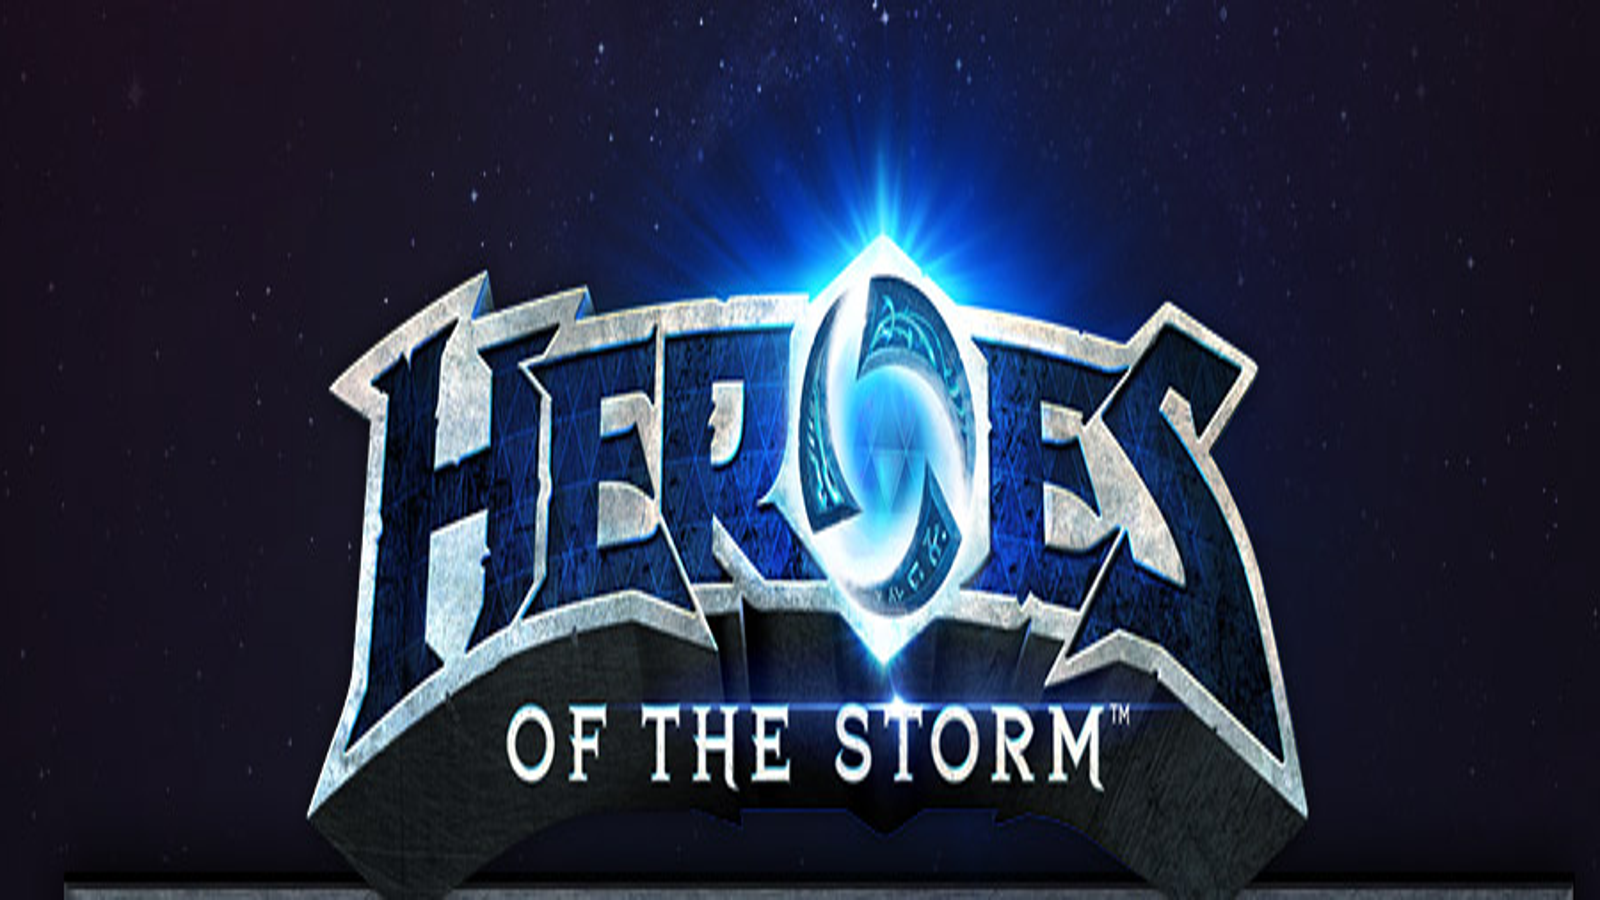 Heroes of the Storm png images